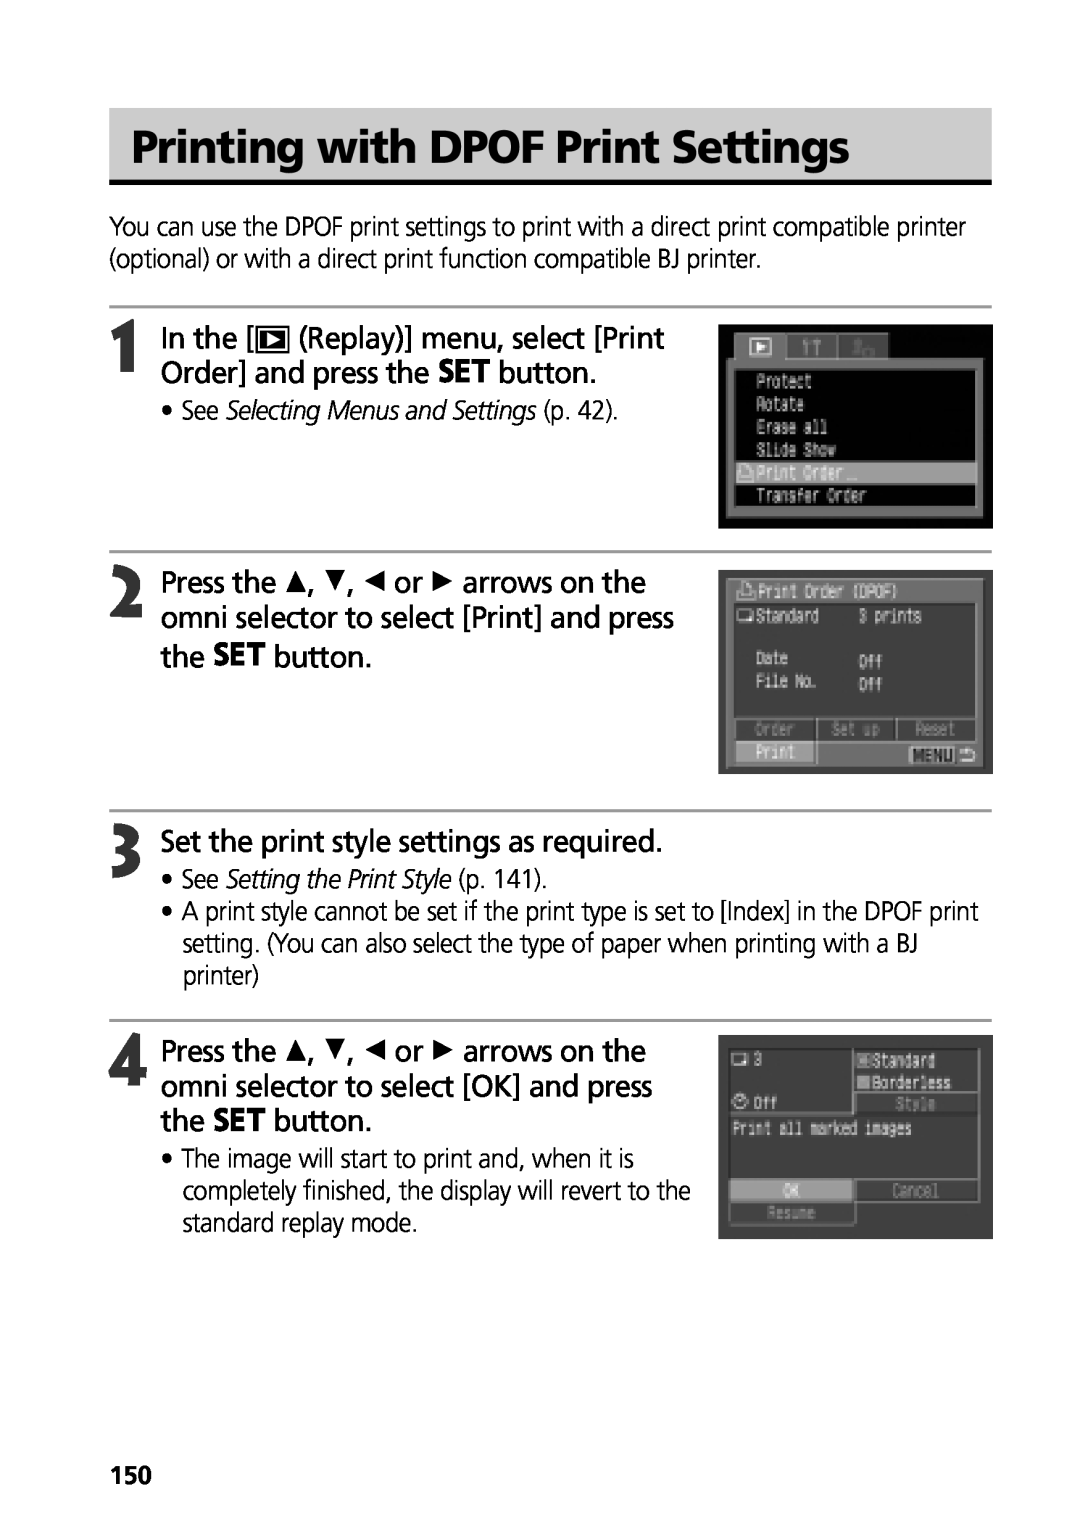 Canon G3 manual Printing with DPOF Print Settings, the button 3 Set the print style settings as required 